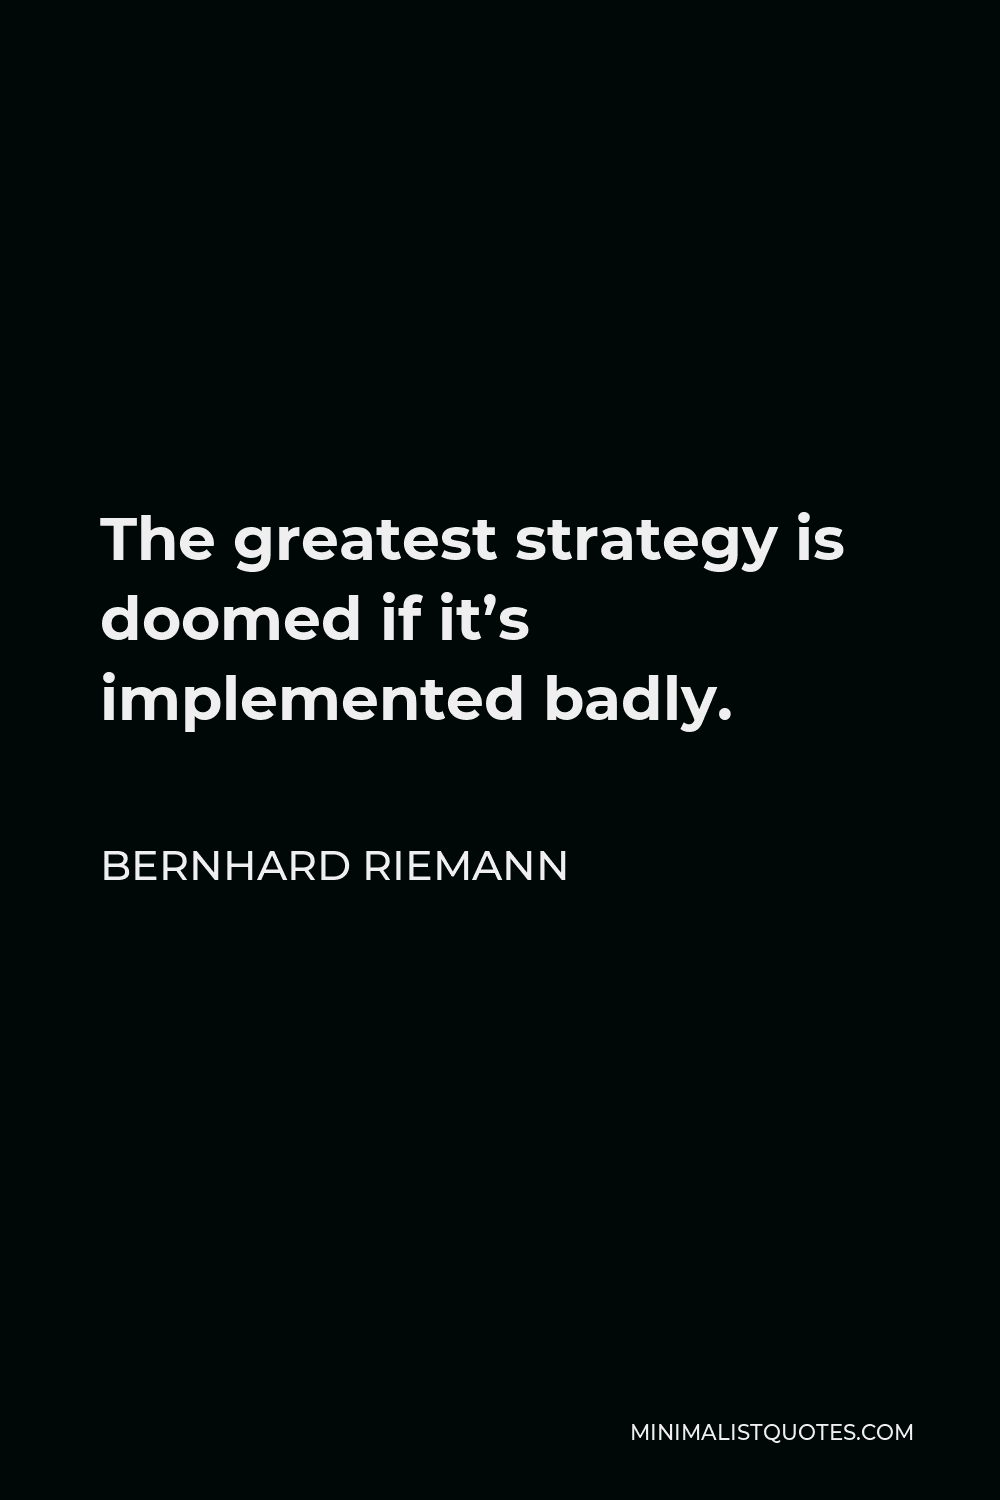 Bernhard Riemann Quote - The greatest strategy is doomed if it’s implemented badly.